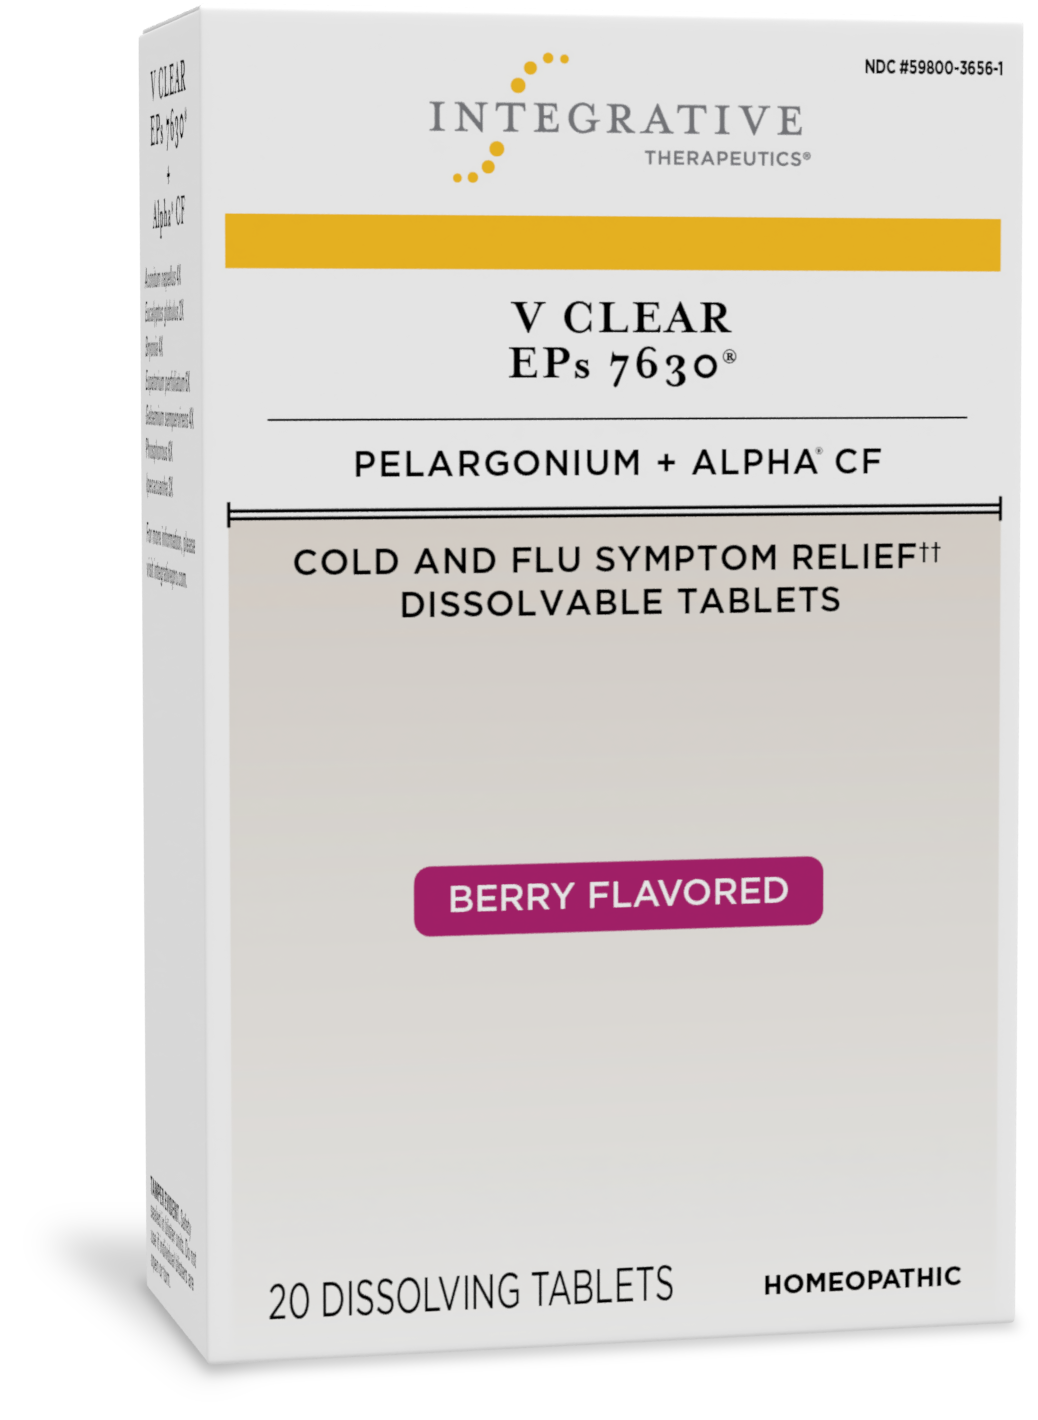 V Clear EPs 7630® Chewable Tablets